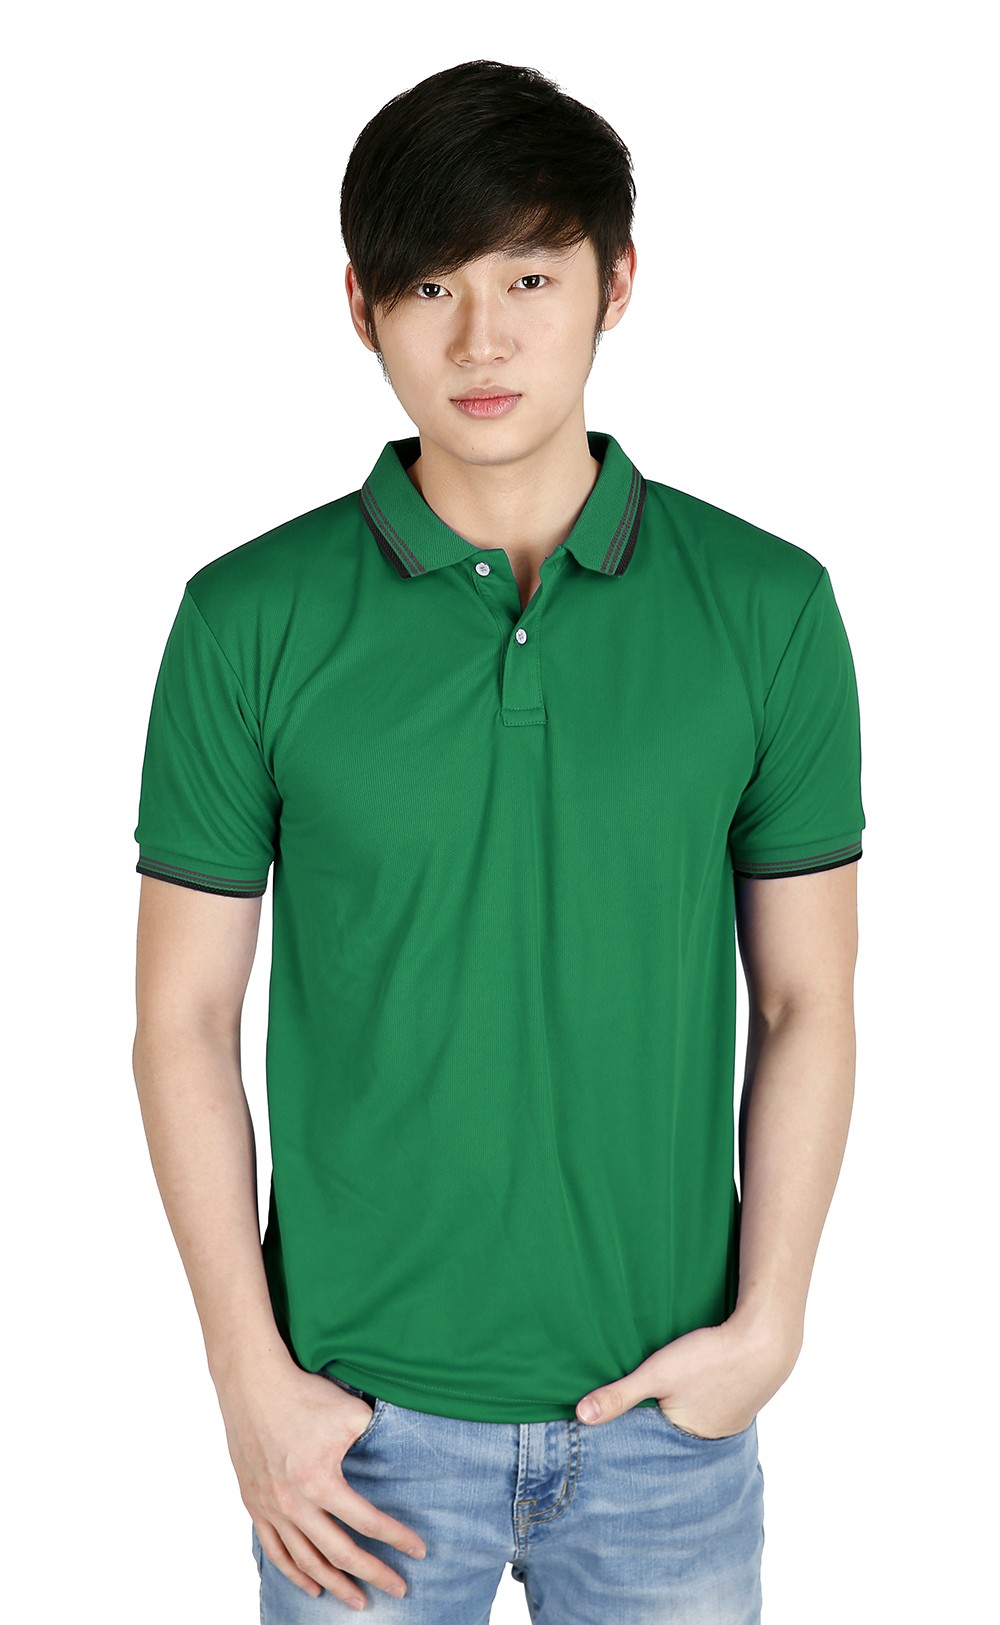 Introducing i-Tech Honeycomb Polo Shirt Philippines